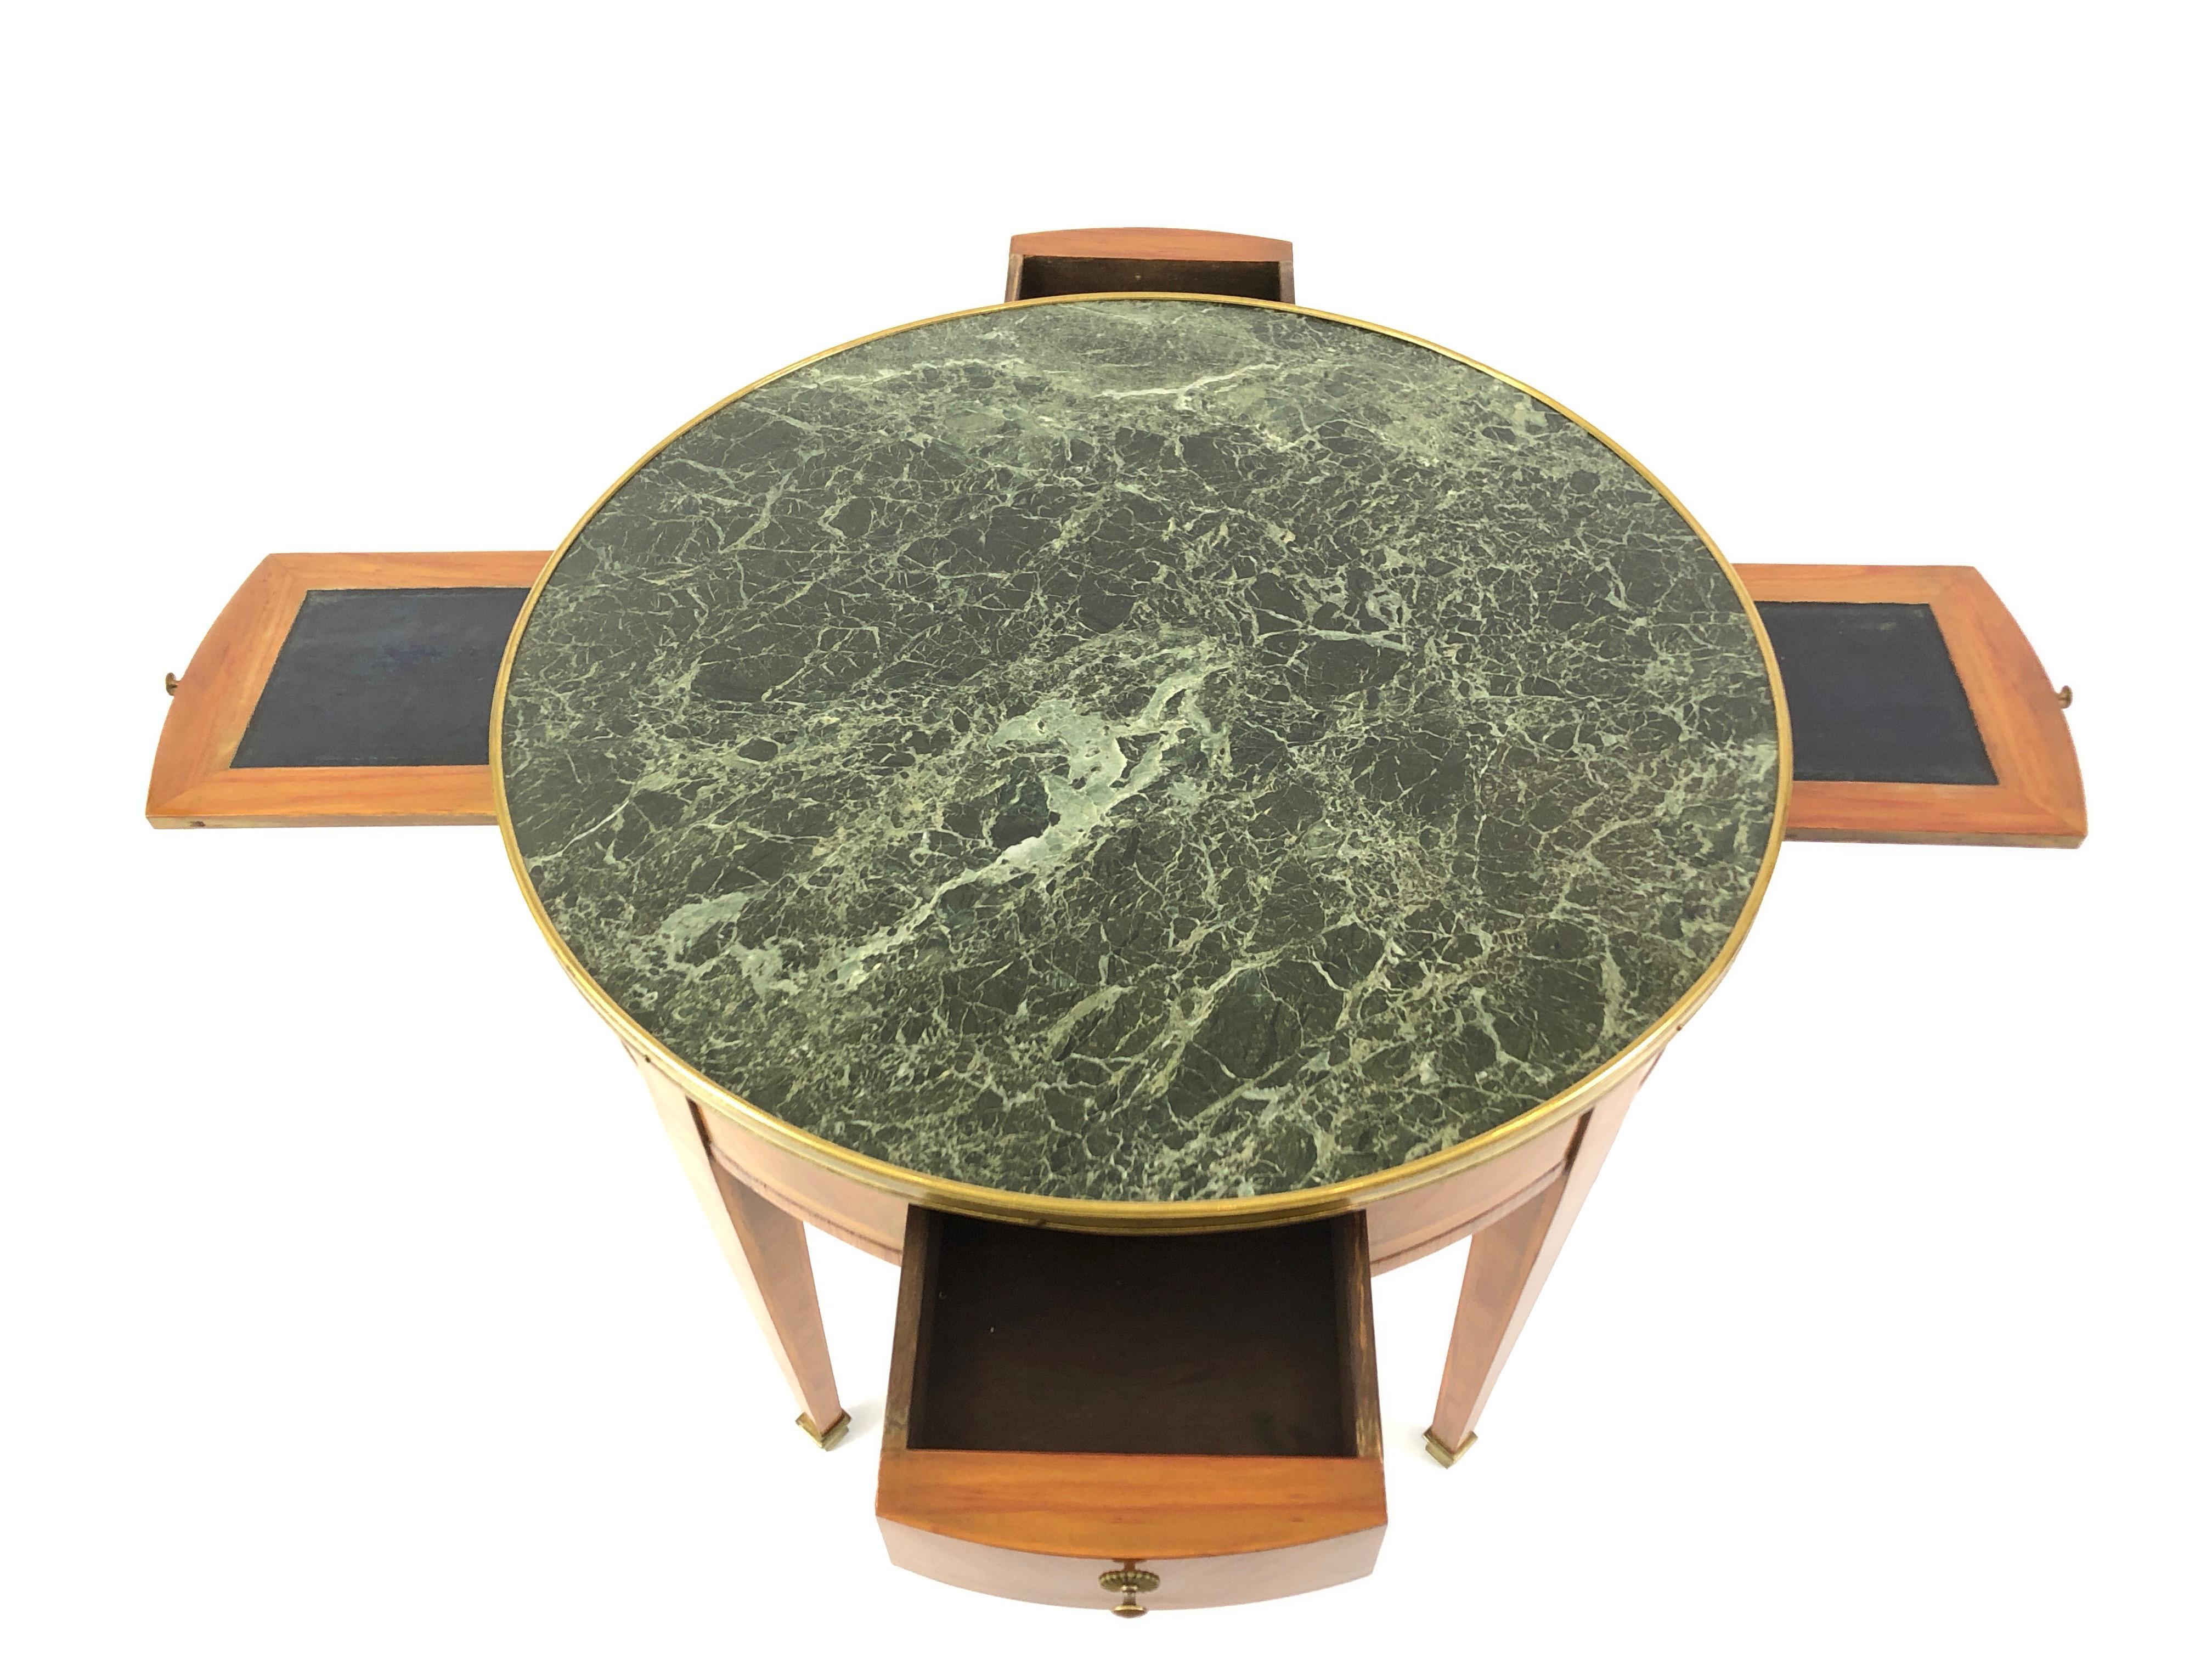 Vintage round French table having a wonderful dark green and cream marble top, brass gallery and gorgeous inlaid satinwood base. The top has 2 drawers and 2 pull out leather trays or slides around the underside periphery-- the slides are a great